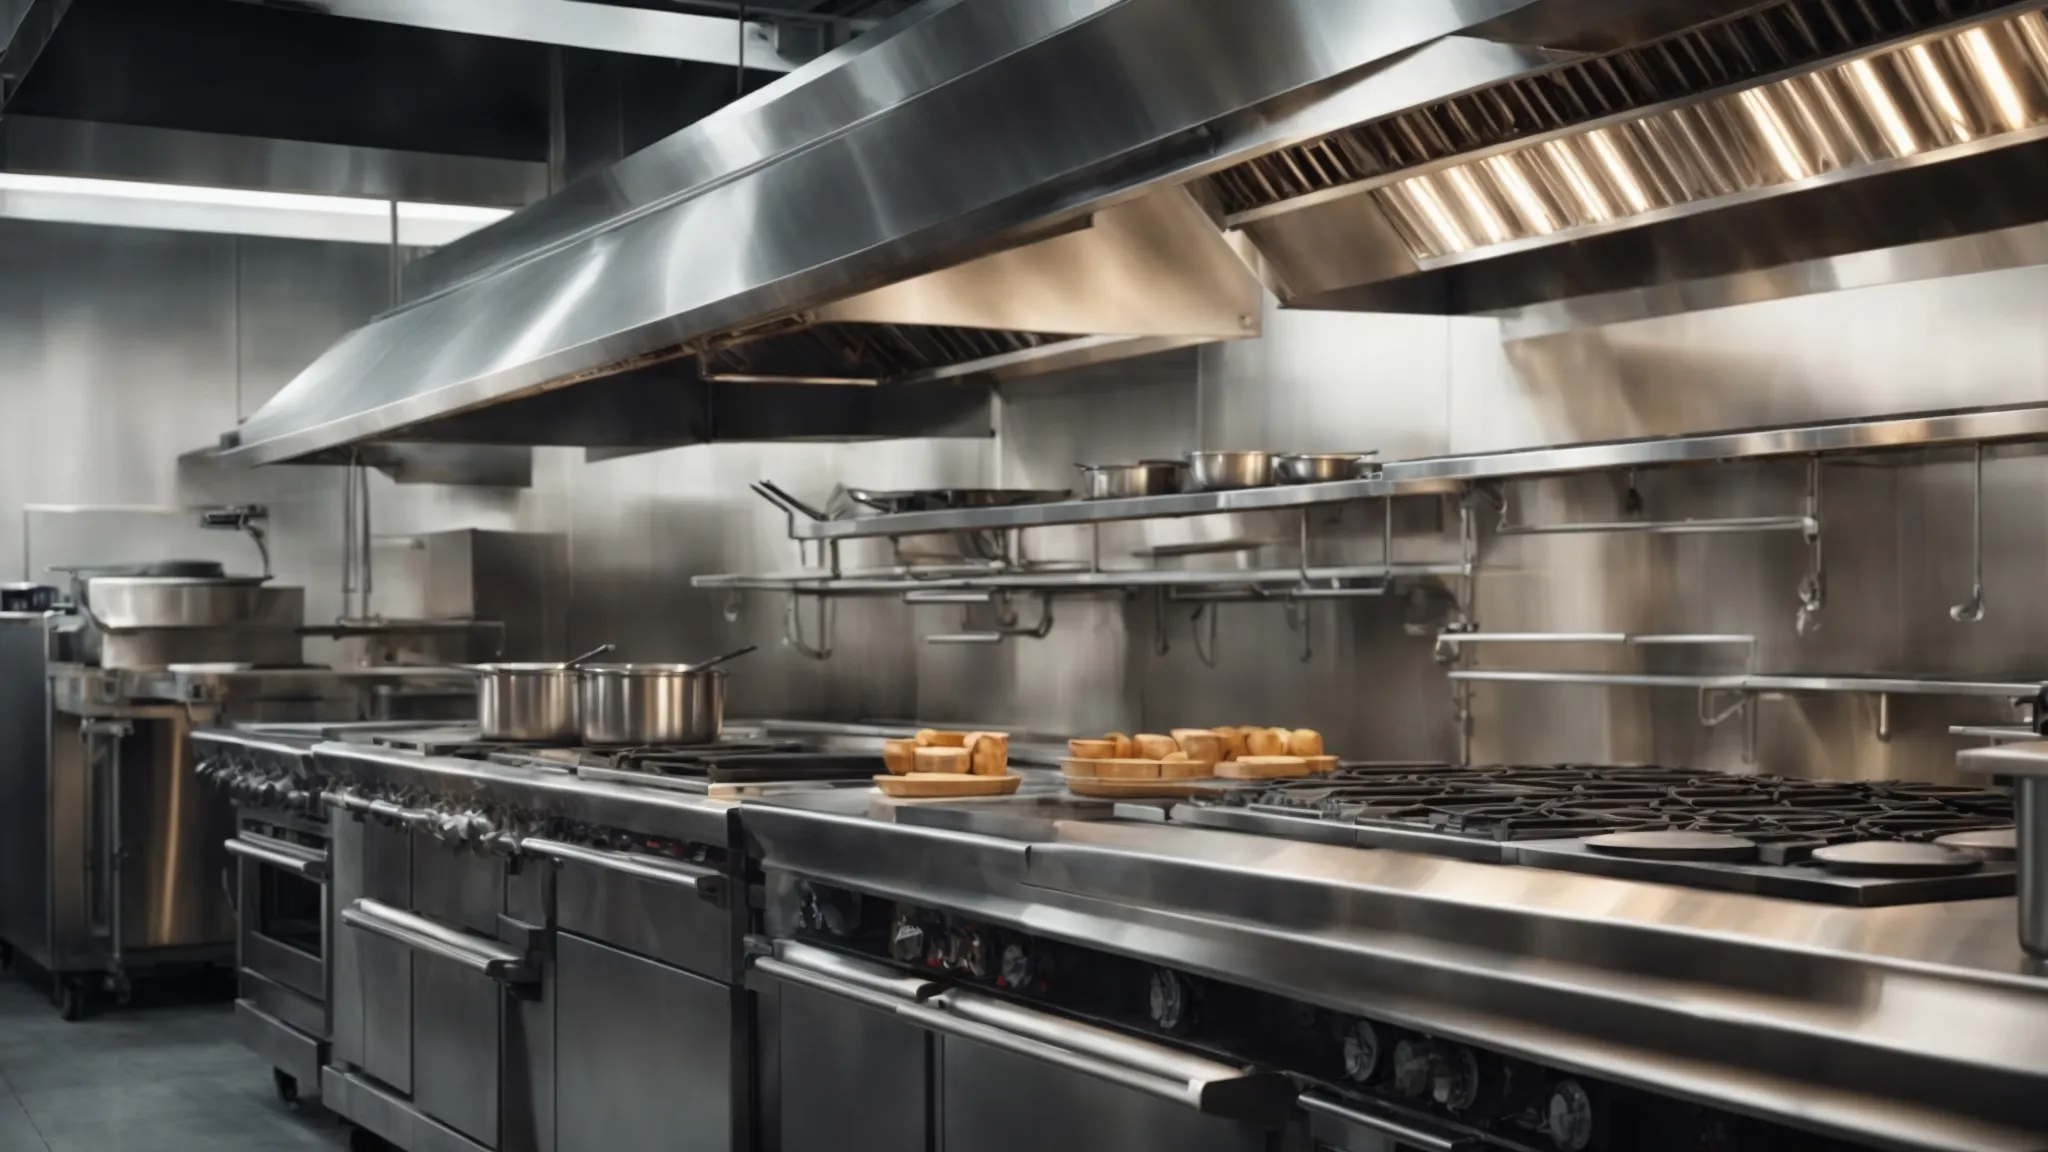 a commercial kitchen gleams with stainless steel surfaces, showcasing a large, clean hood exhaust system above a row of industrial stoves.